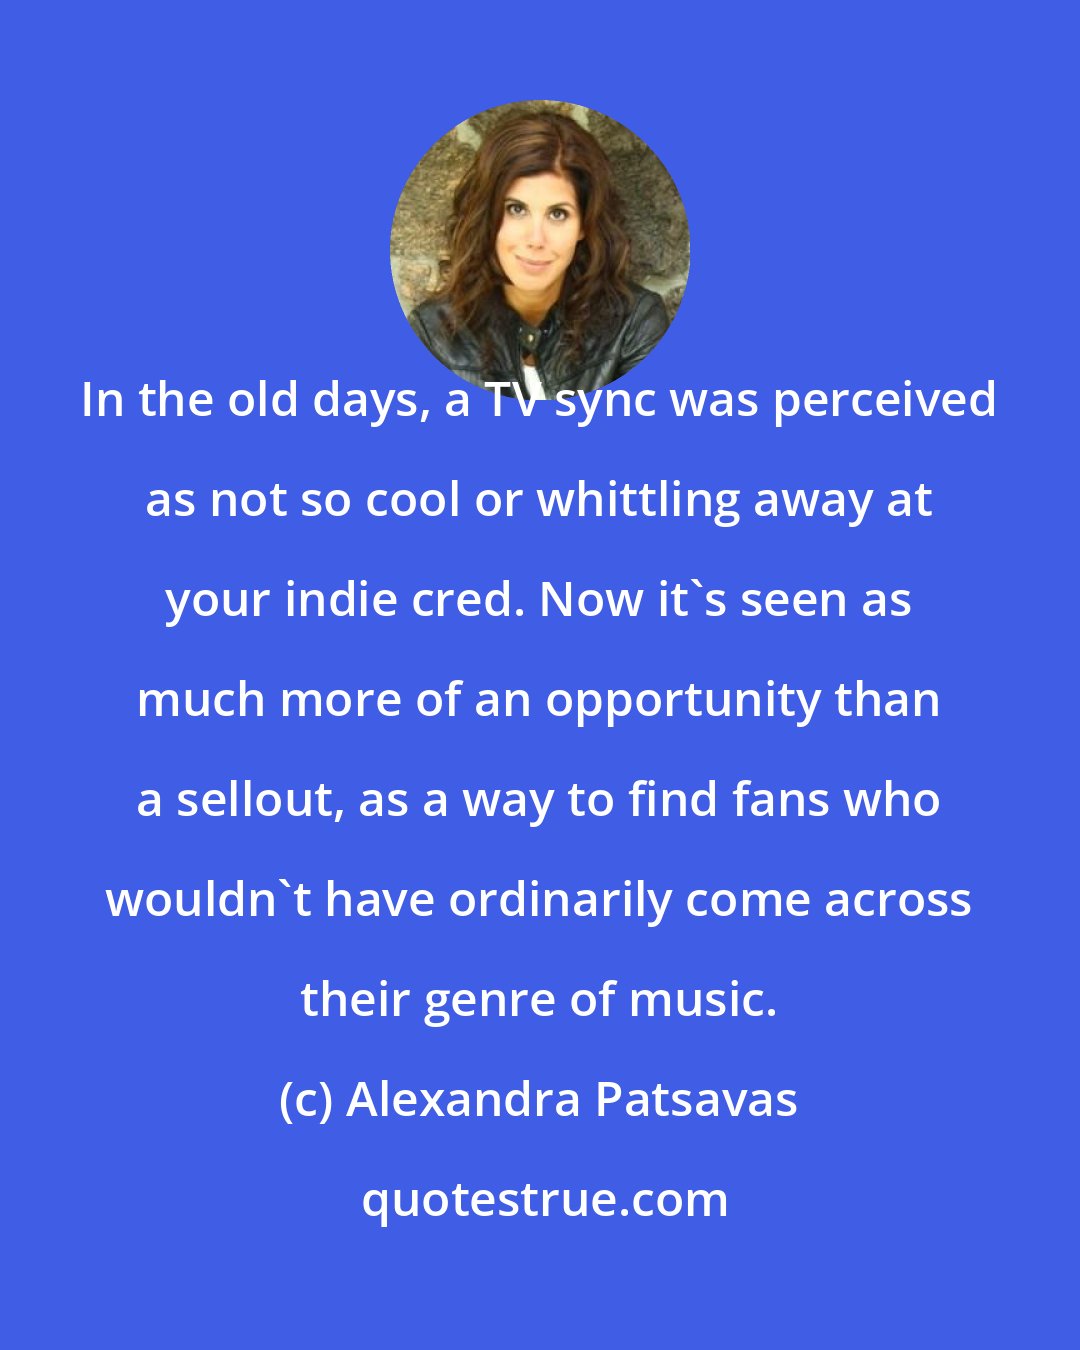 Alexandra Patsavas: In the old days, a TV sync was perceived as not so cool or whittling away at your indie cred. Now it's seen as much more of an opportunity than a sellout, as a way to find fans who wouldn't have ordinarily come across their genre of music.